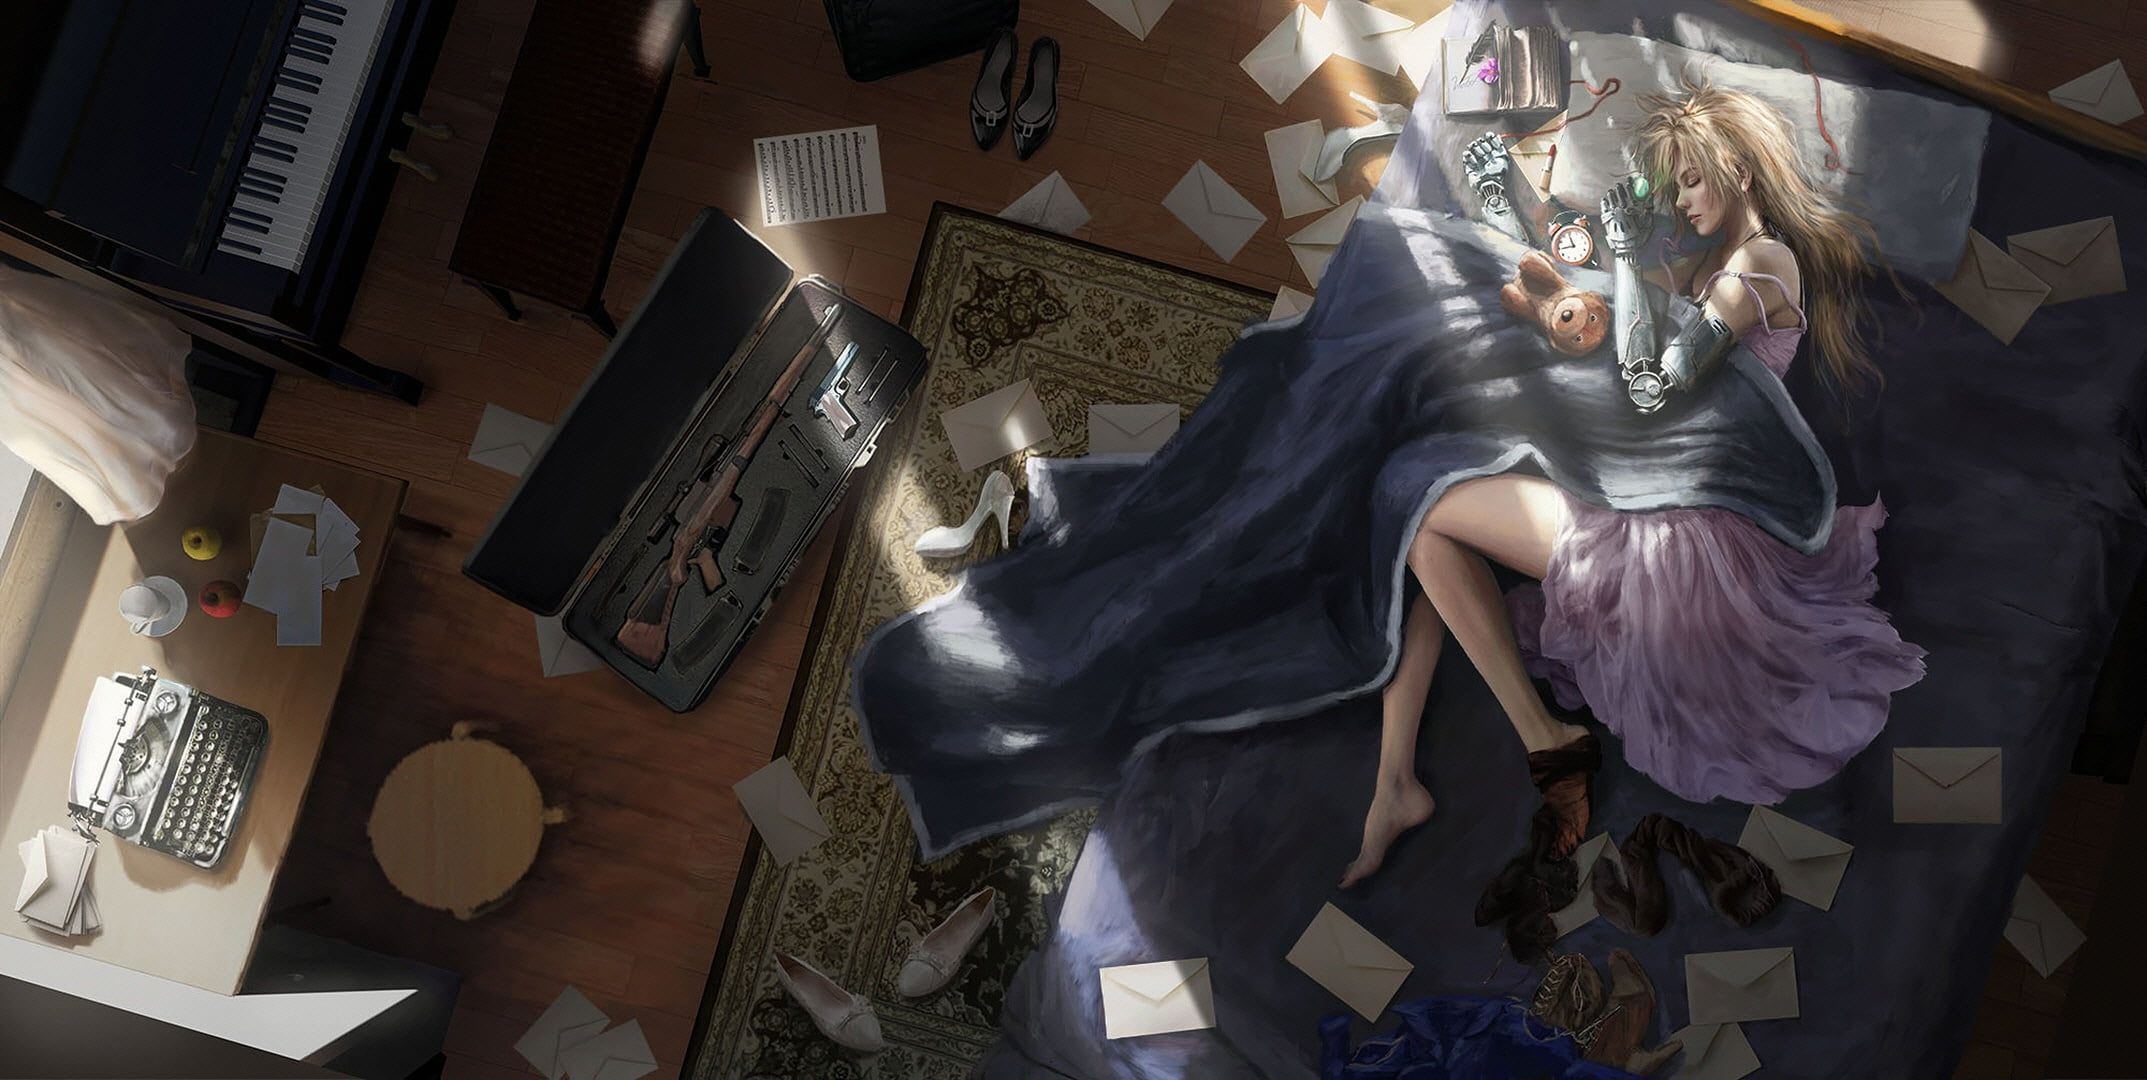 Wallpaper Cyberpunk, Anime, Retro Punk Anime Girl Lying on Bed, Purple,  Violet, Background - Download Free Image